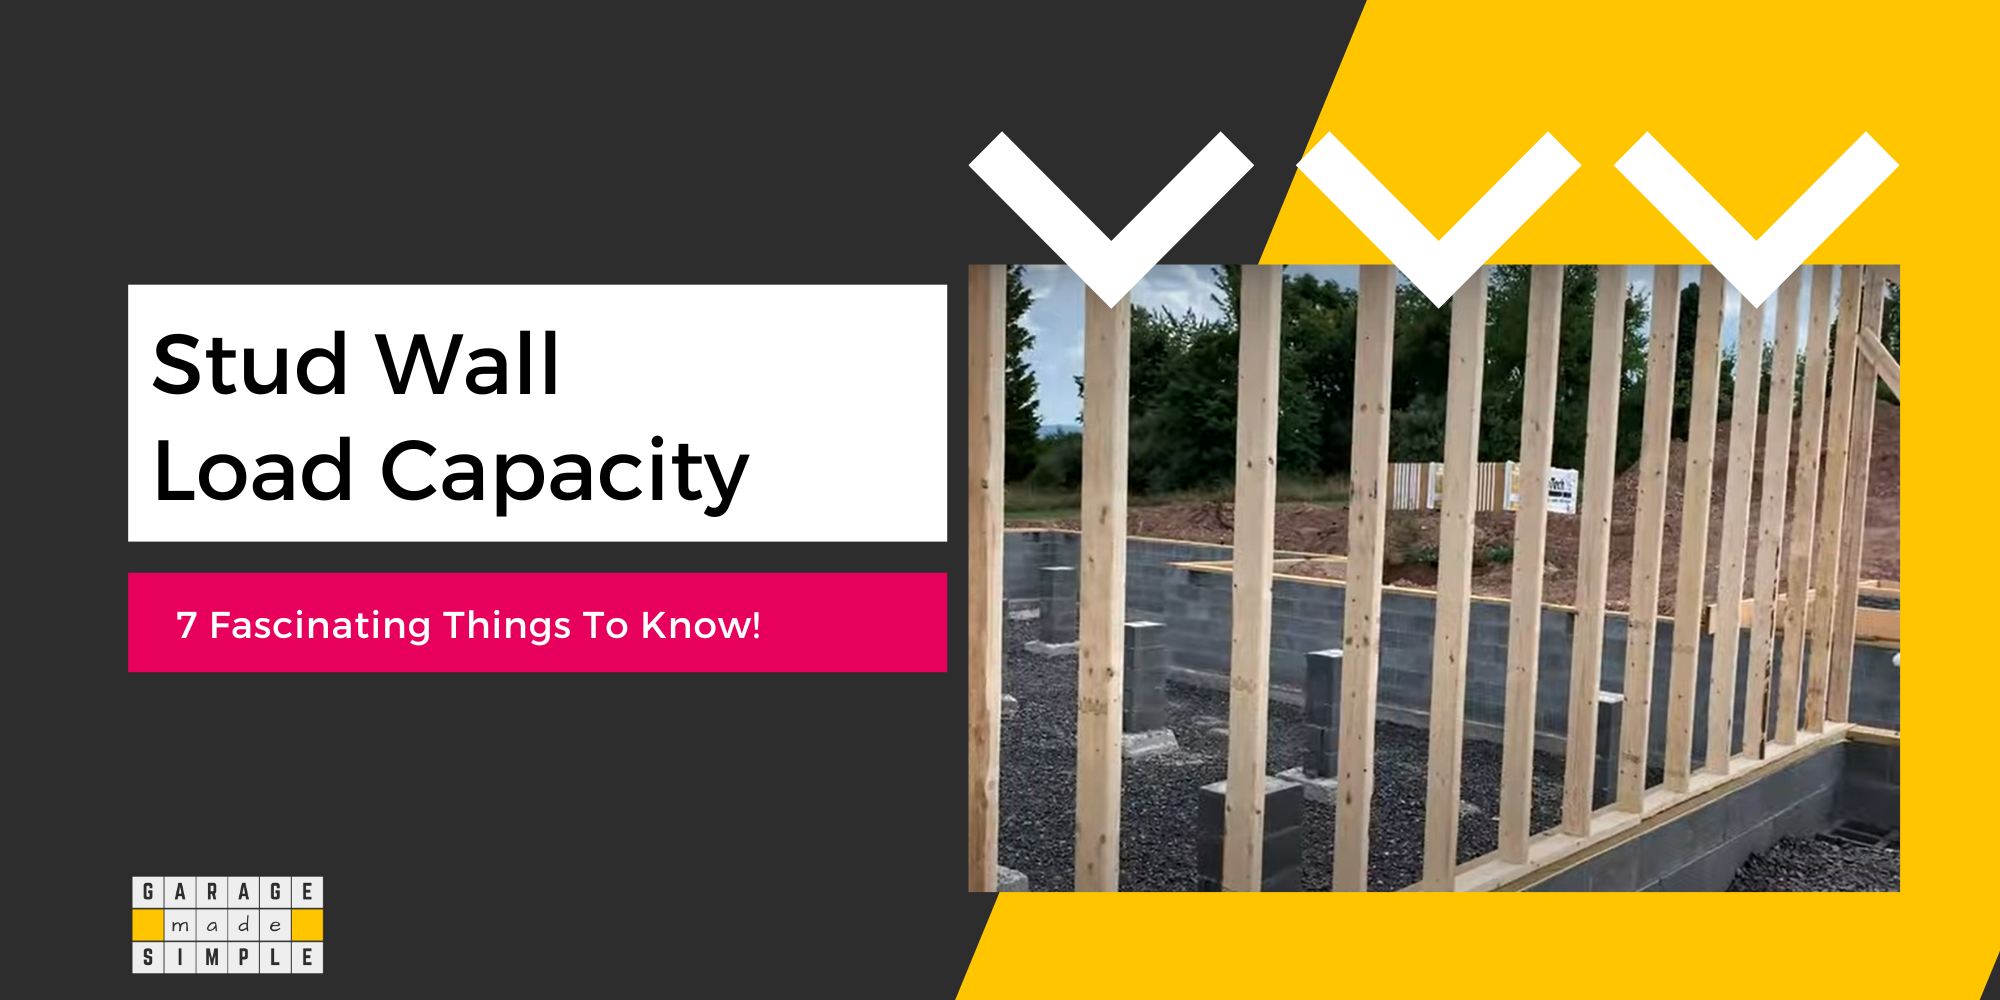 Stud Wall Load Capacity: 7 Fascinating Things You Need To Know!